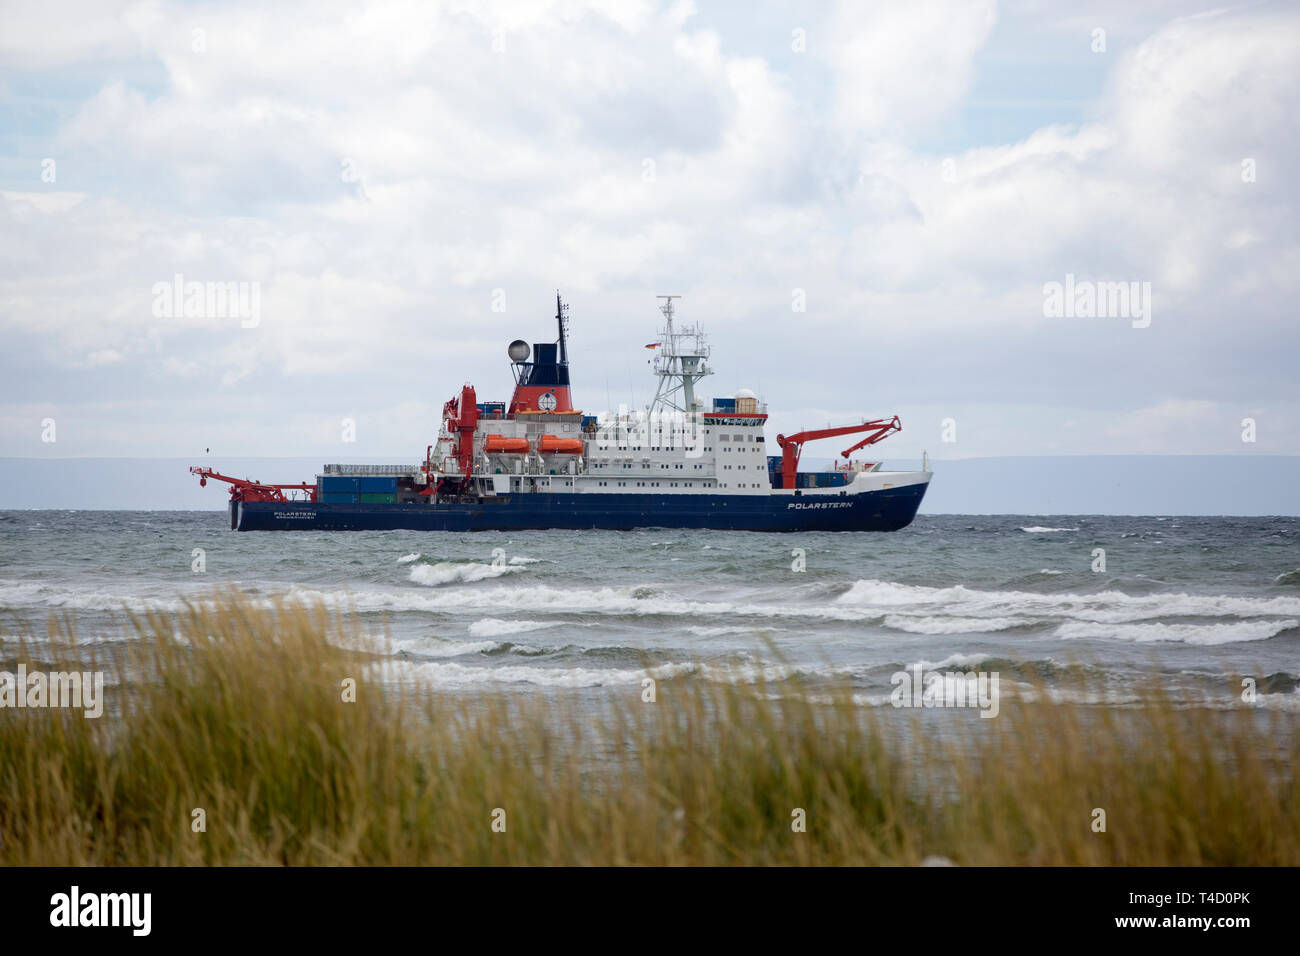 The Polarstern in Punta Arenas, a German ricebreaking science research vessel from the Alfred Wegener institute. Stock Photo